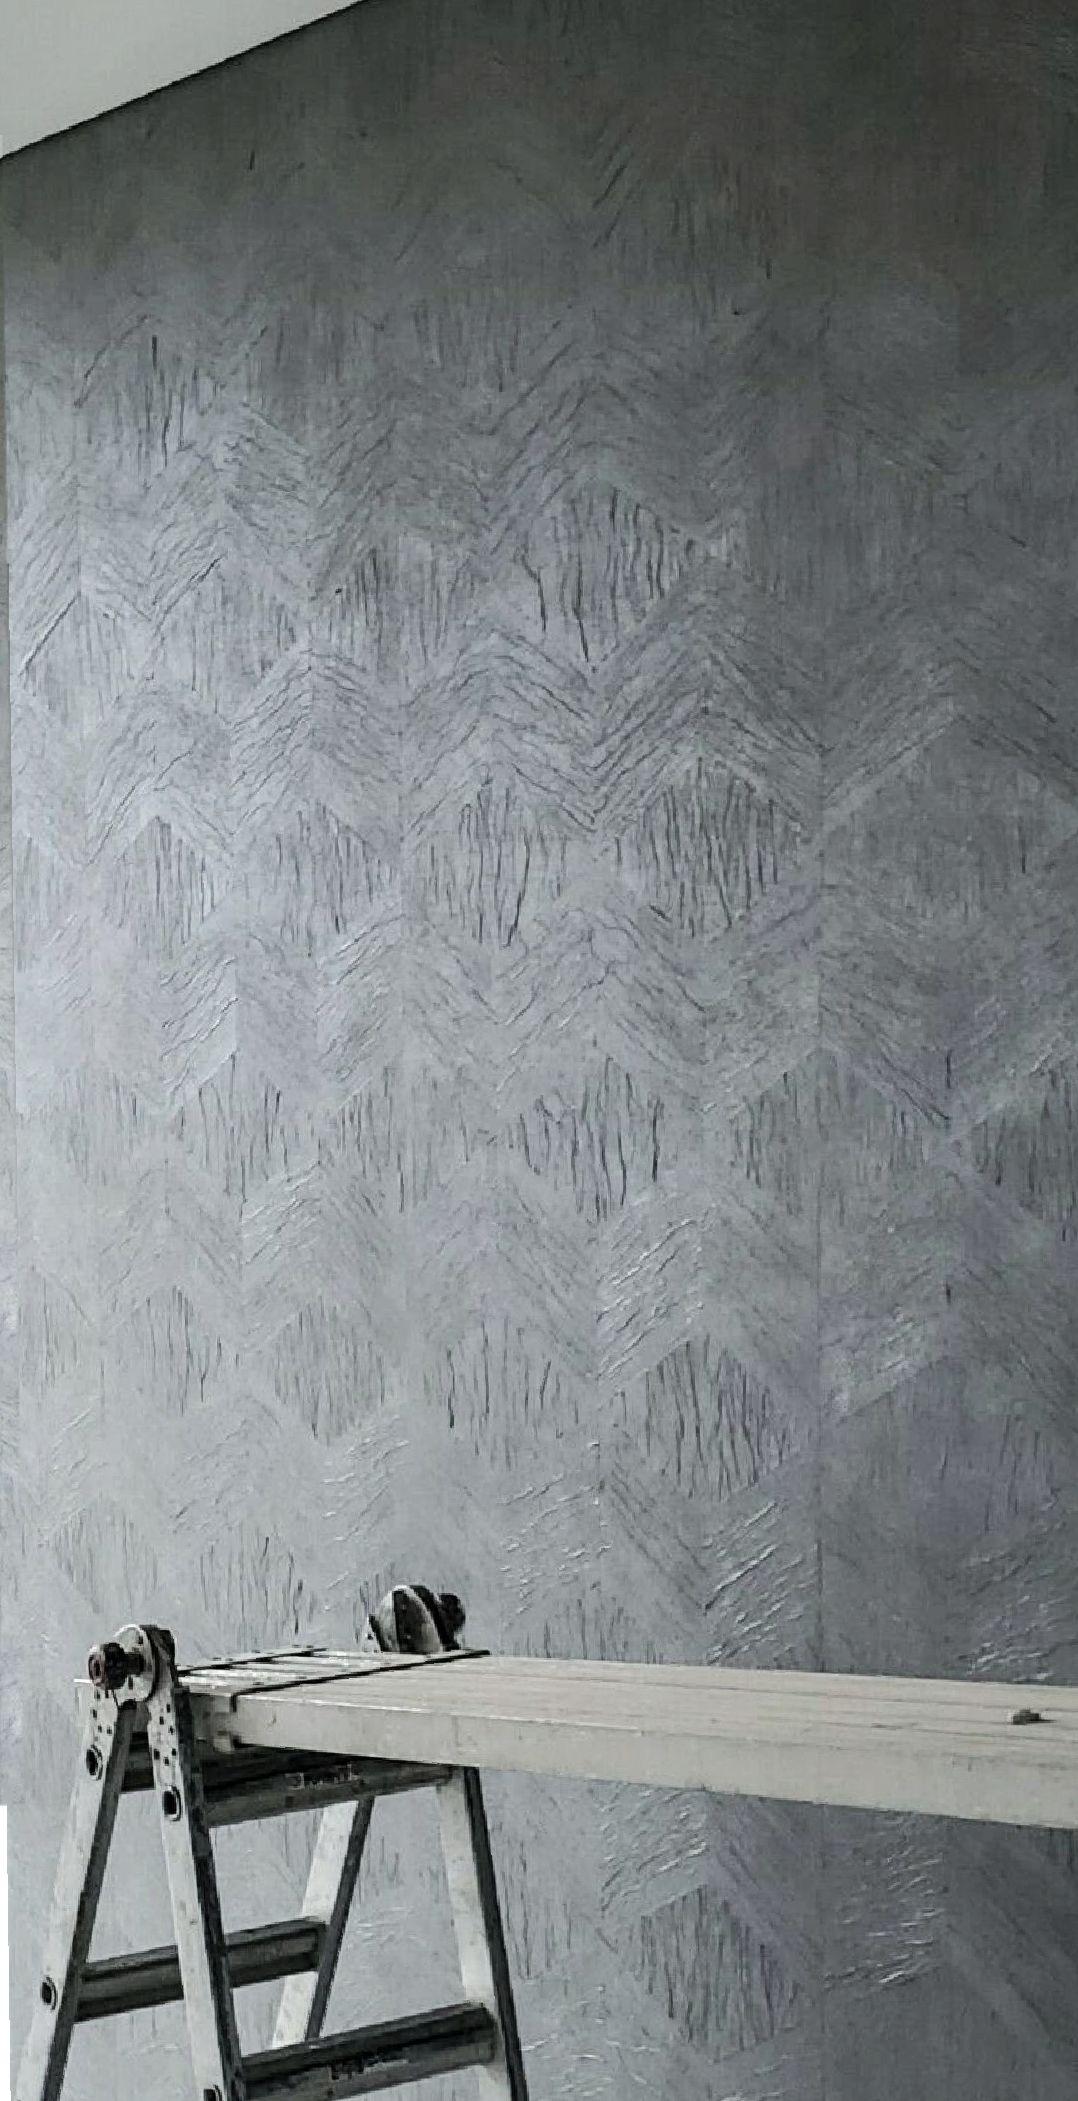 Phillip Jeffries modern mosaic artisanal wallpaper sleek gray, 5013. Artisan’s Guild custom collection. Trade only. MSRP is 200 dollars per yard. Listing is for one bolt of 12 yards.

From Phillip Jeffries:
Turning your walls into a masterpiece,